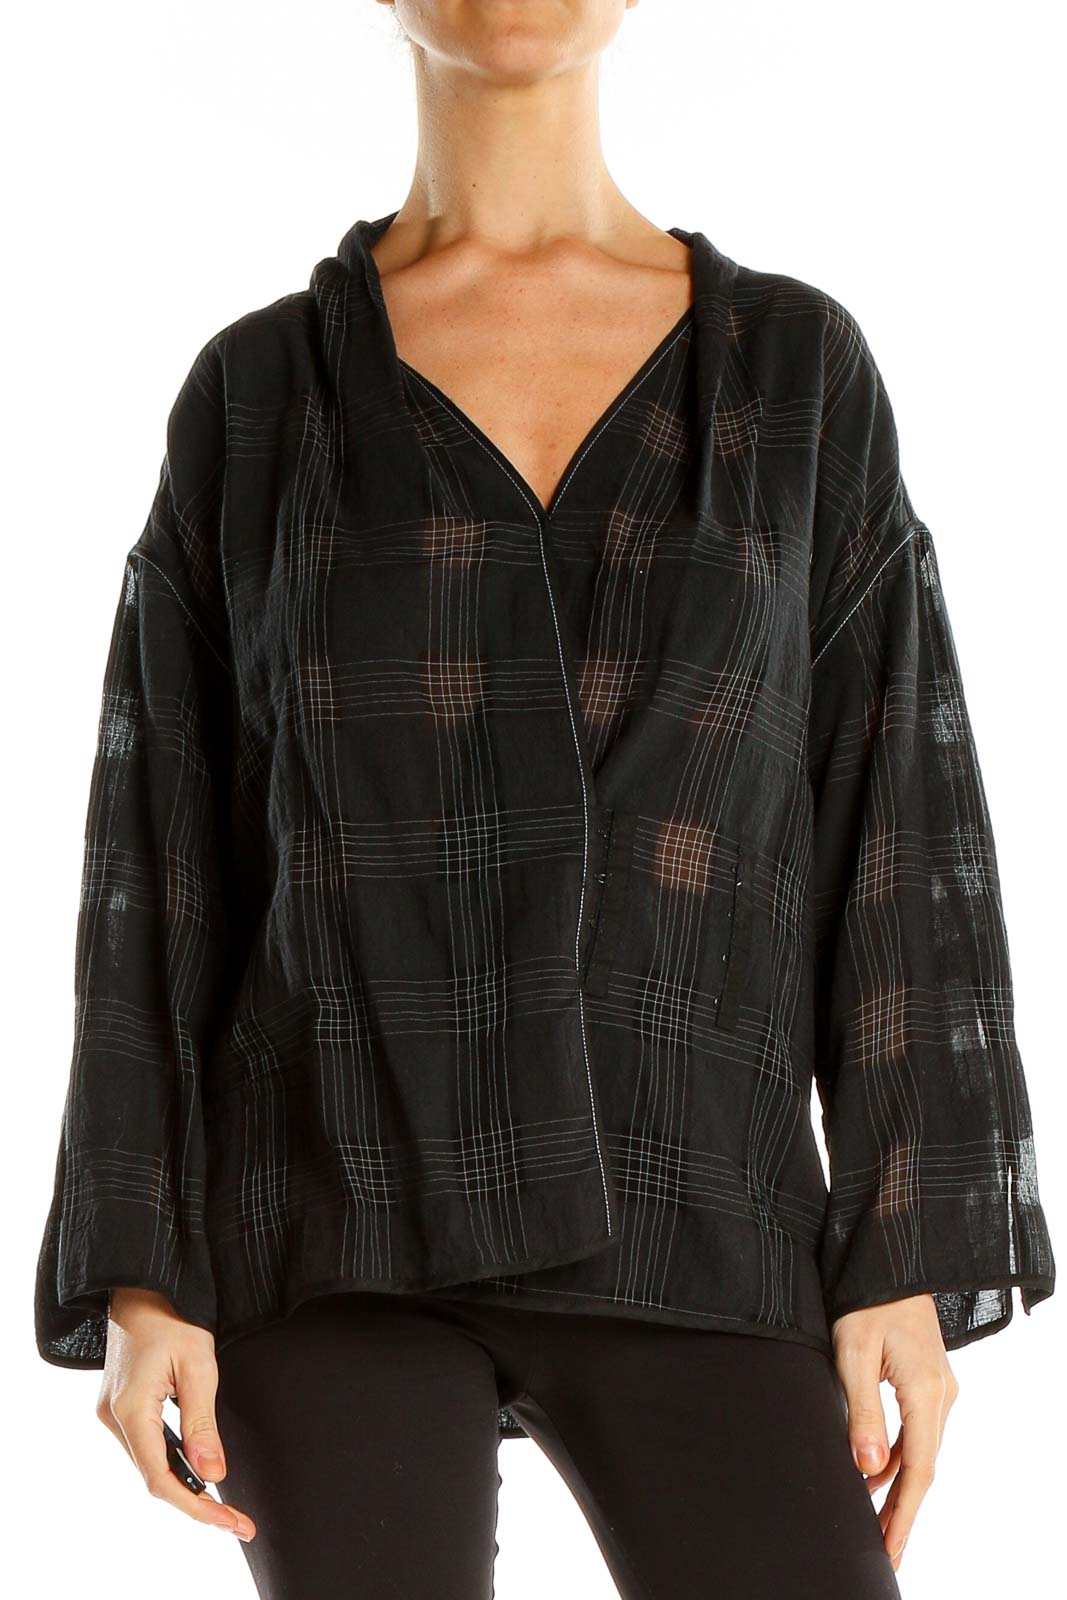 Black Checkered All Day Wear Top With Hook and Eye Detail Front